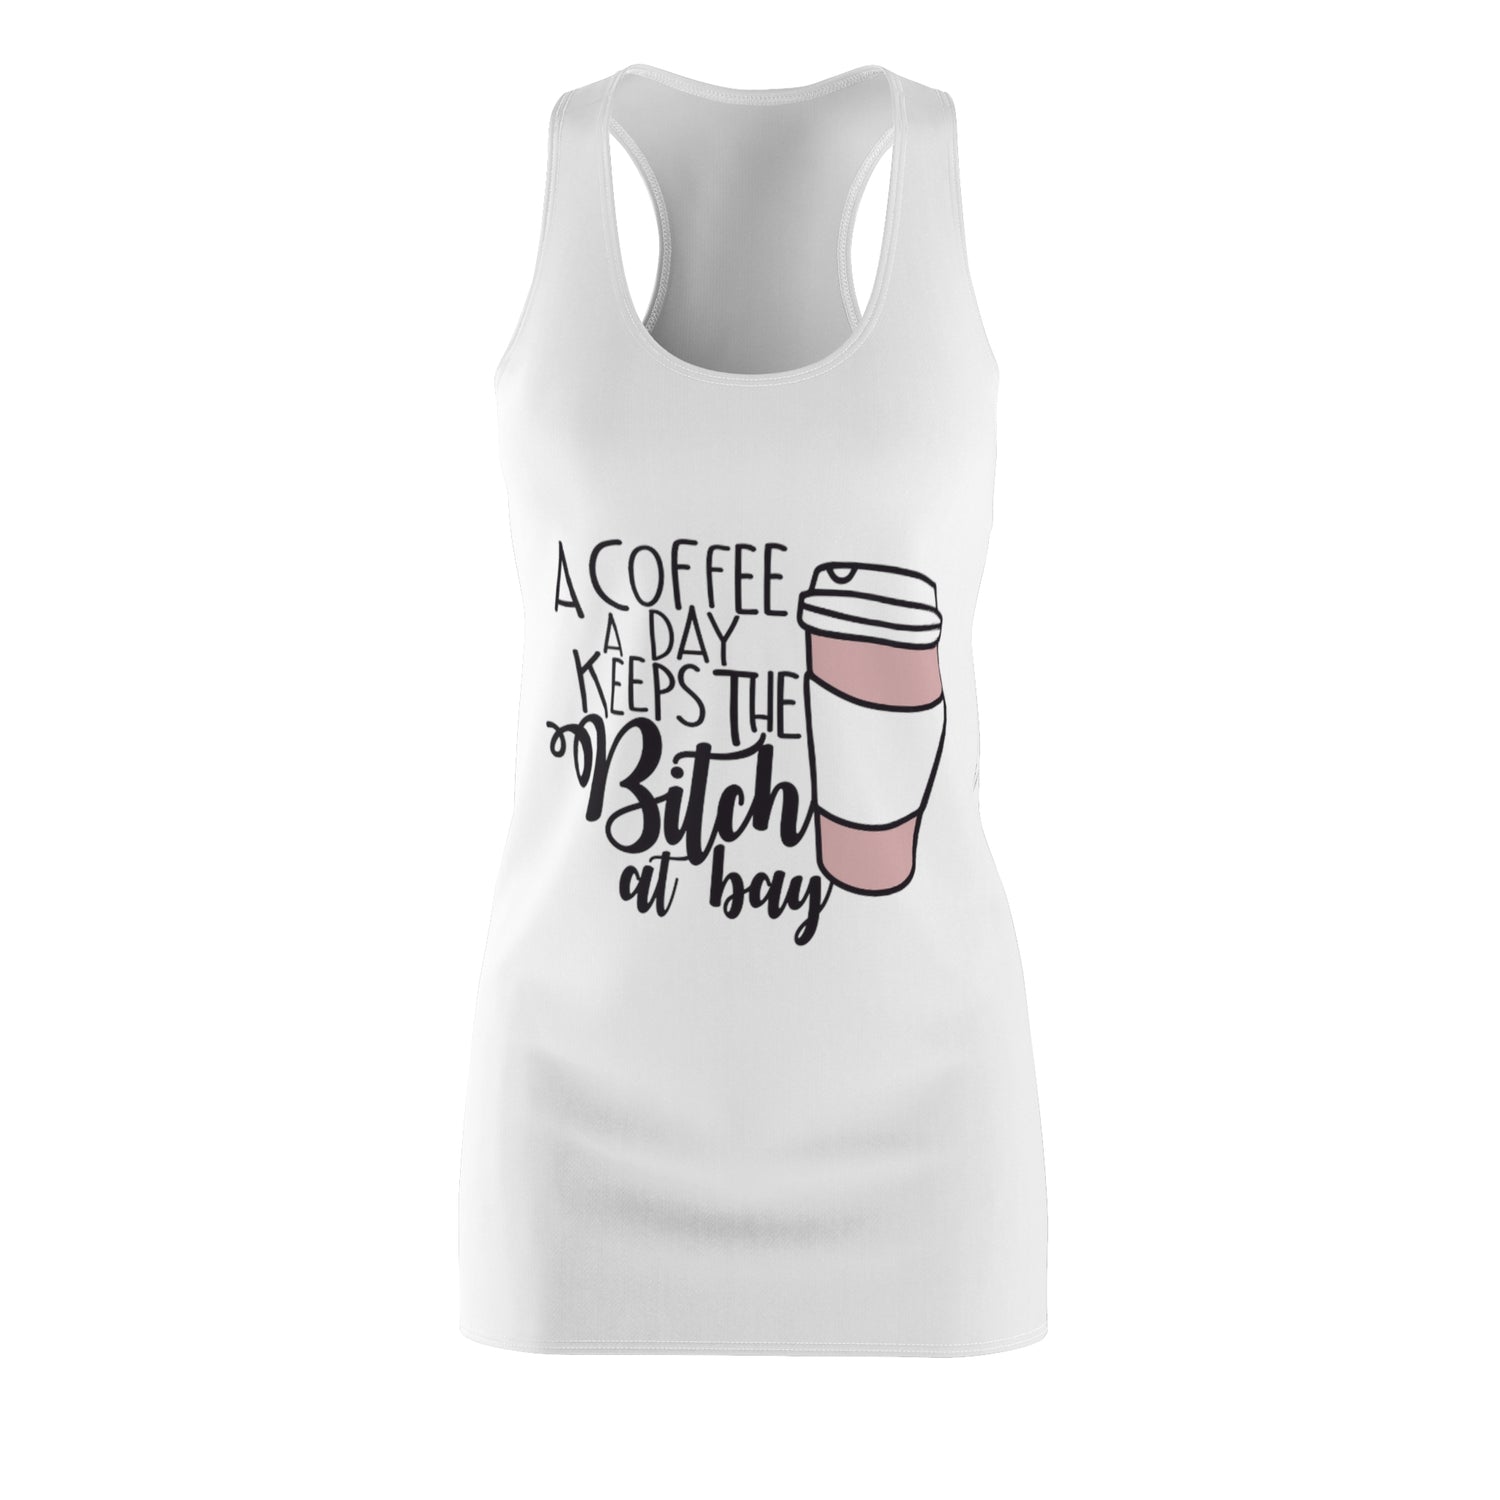 A Coffee a Day Keeps the B!tch at Bay Women&